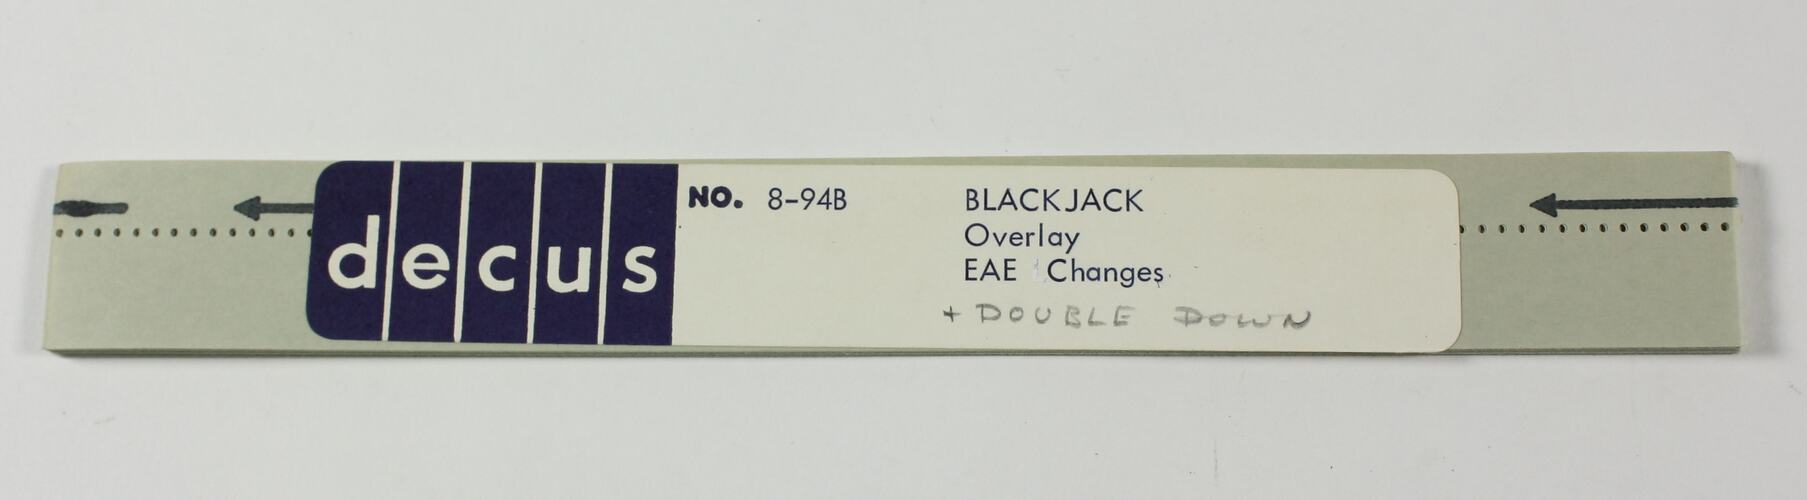 Paper Tape - DECUS, '8-94B Black Jack, Overlay, EAE Changes, Double Down'